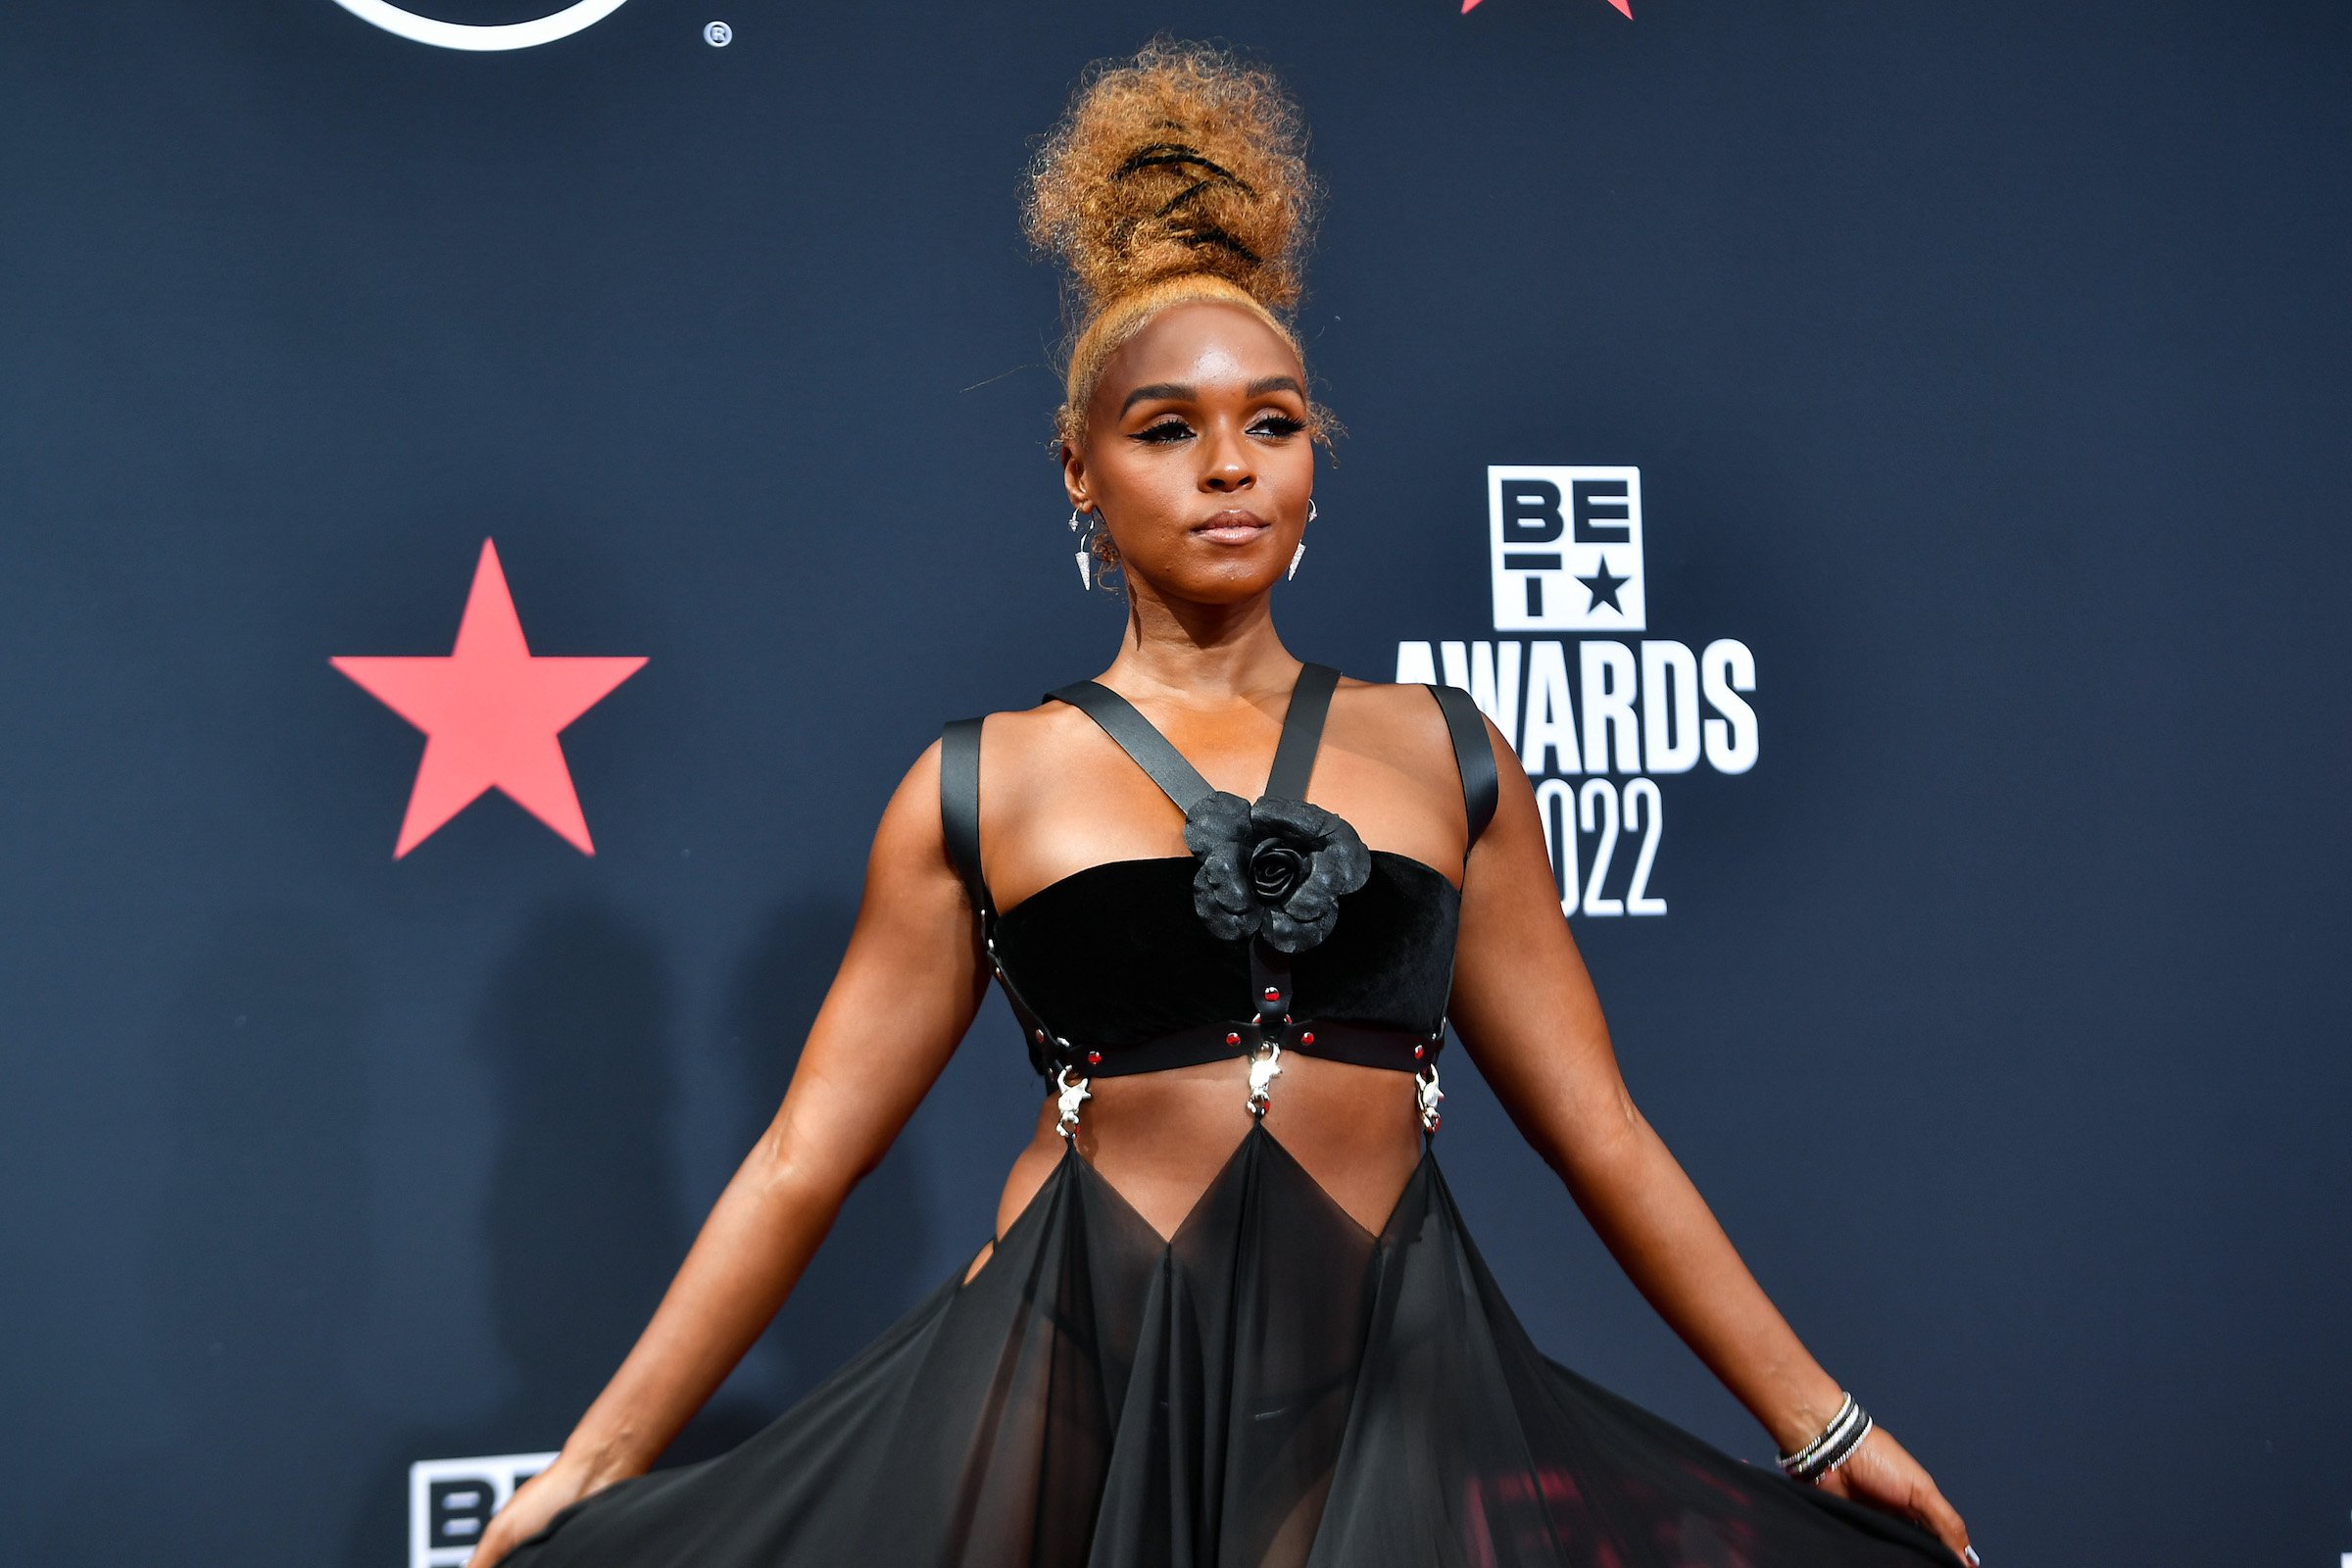 Janelle Monae at the 2022 BET Awards